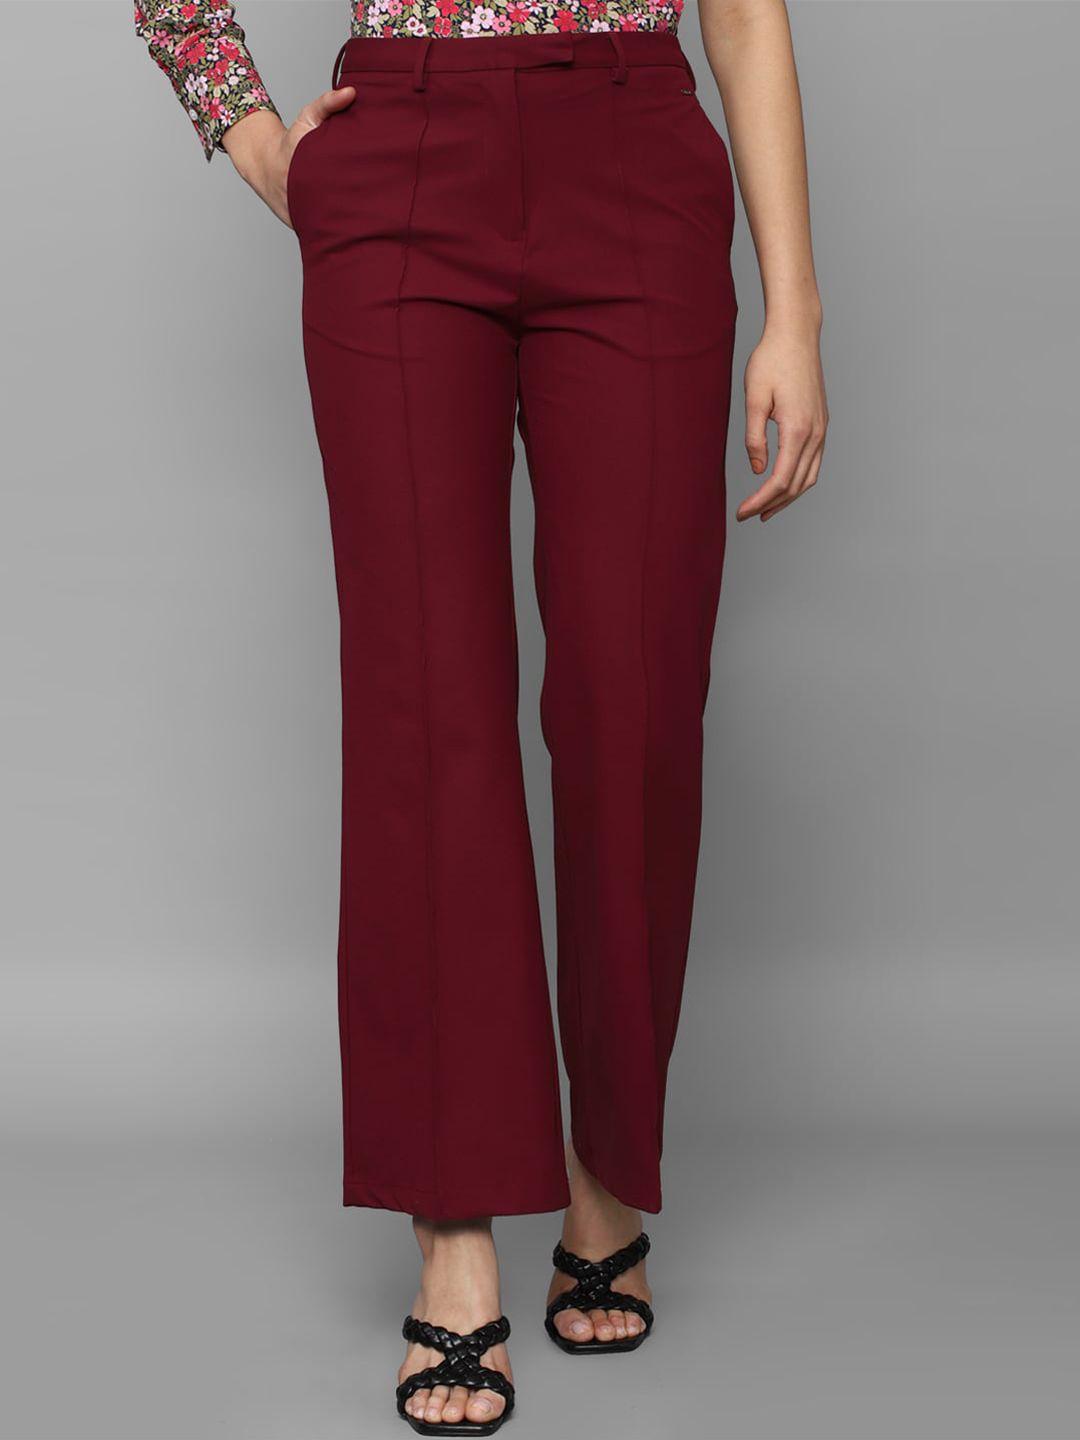 allen-solly-woman-flared-fit-trousers